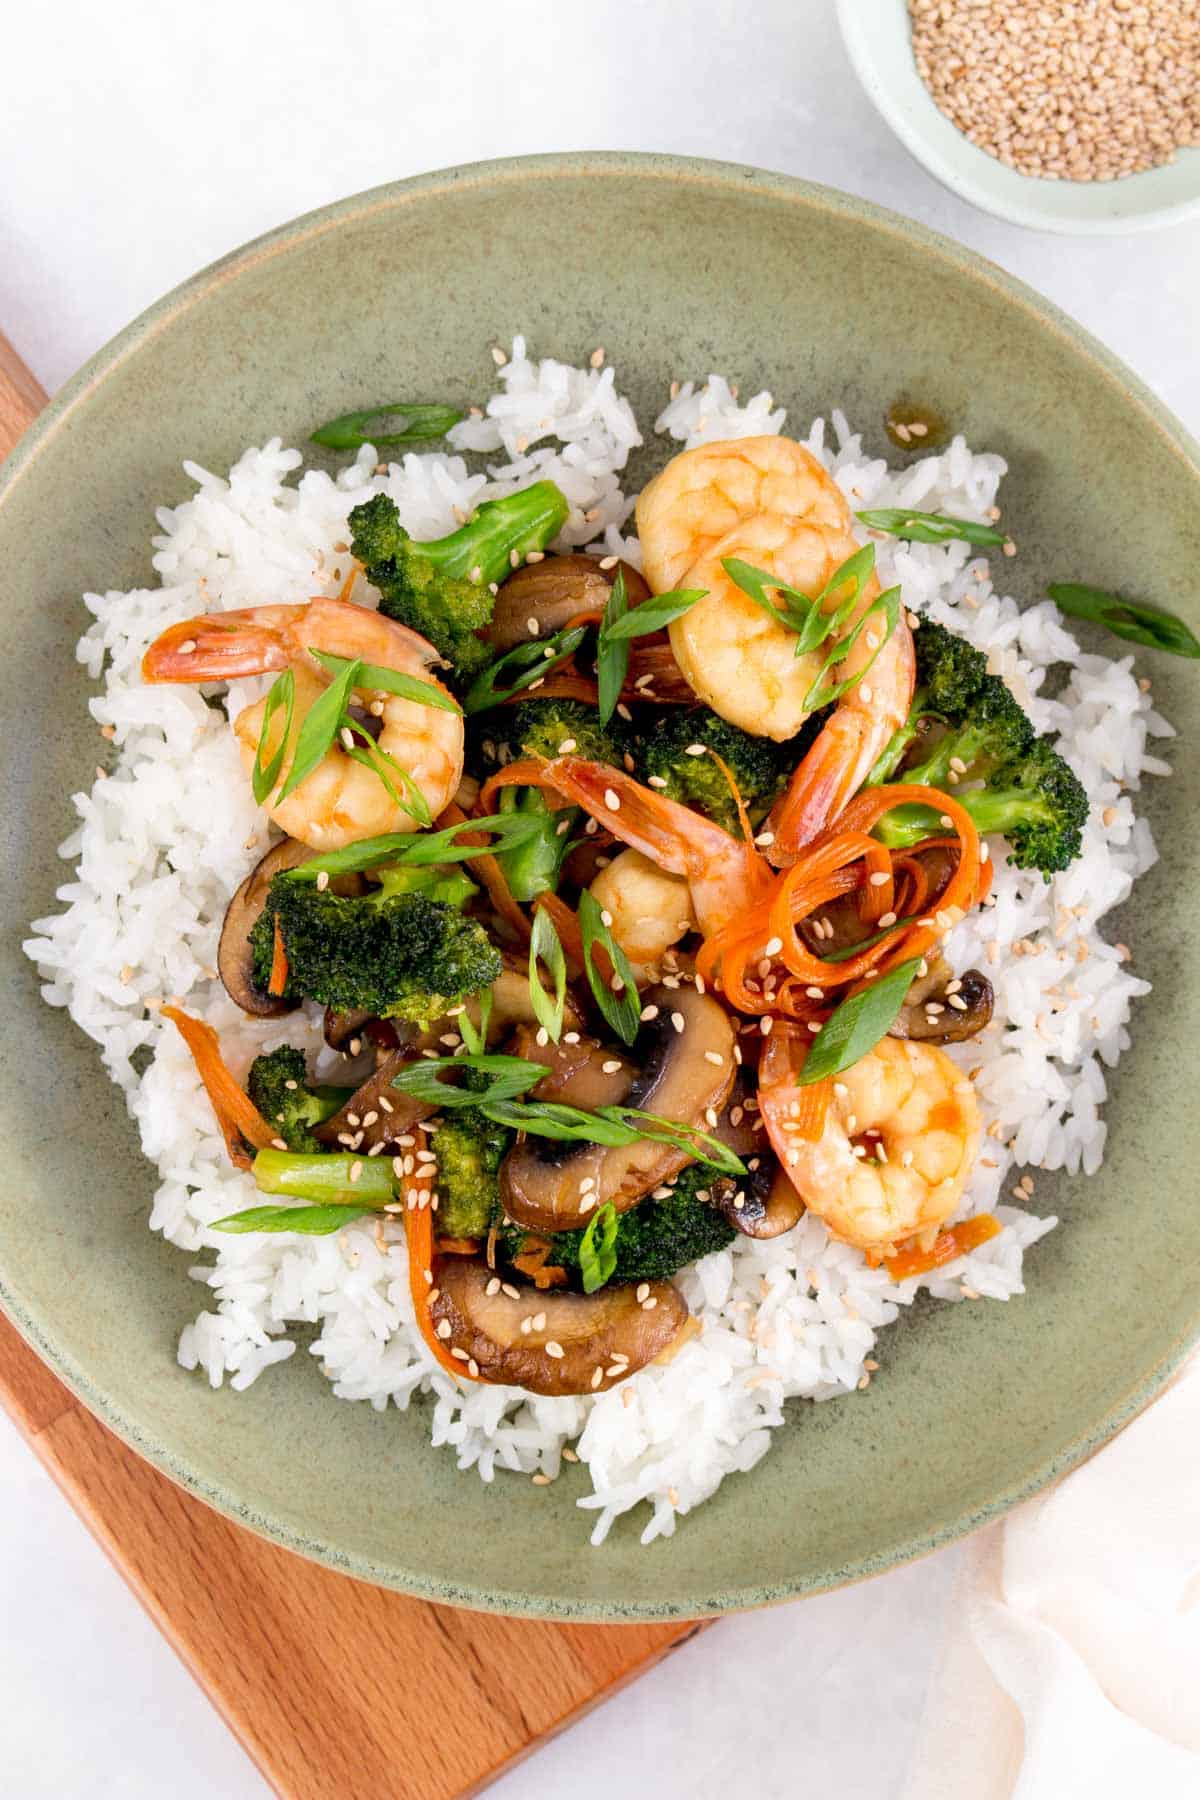 A bowl of rice with shrimp and broccoli on top.